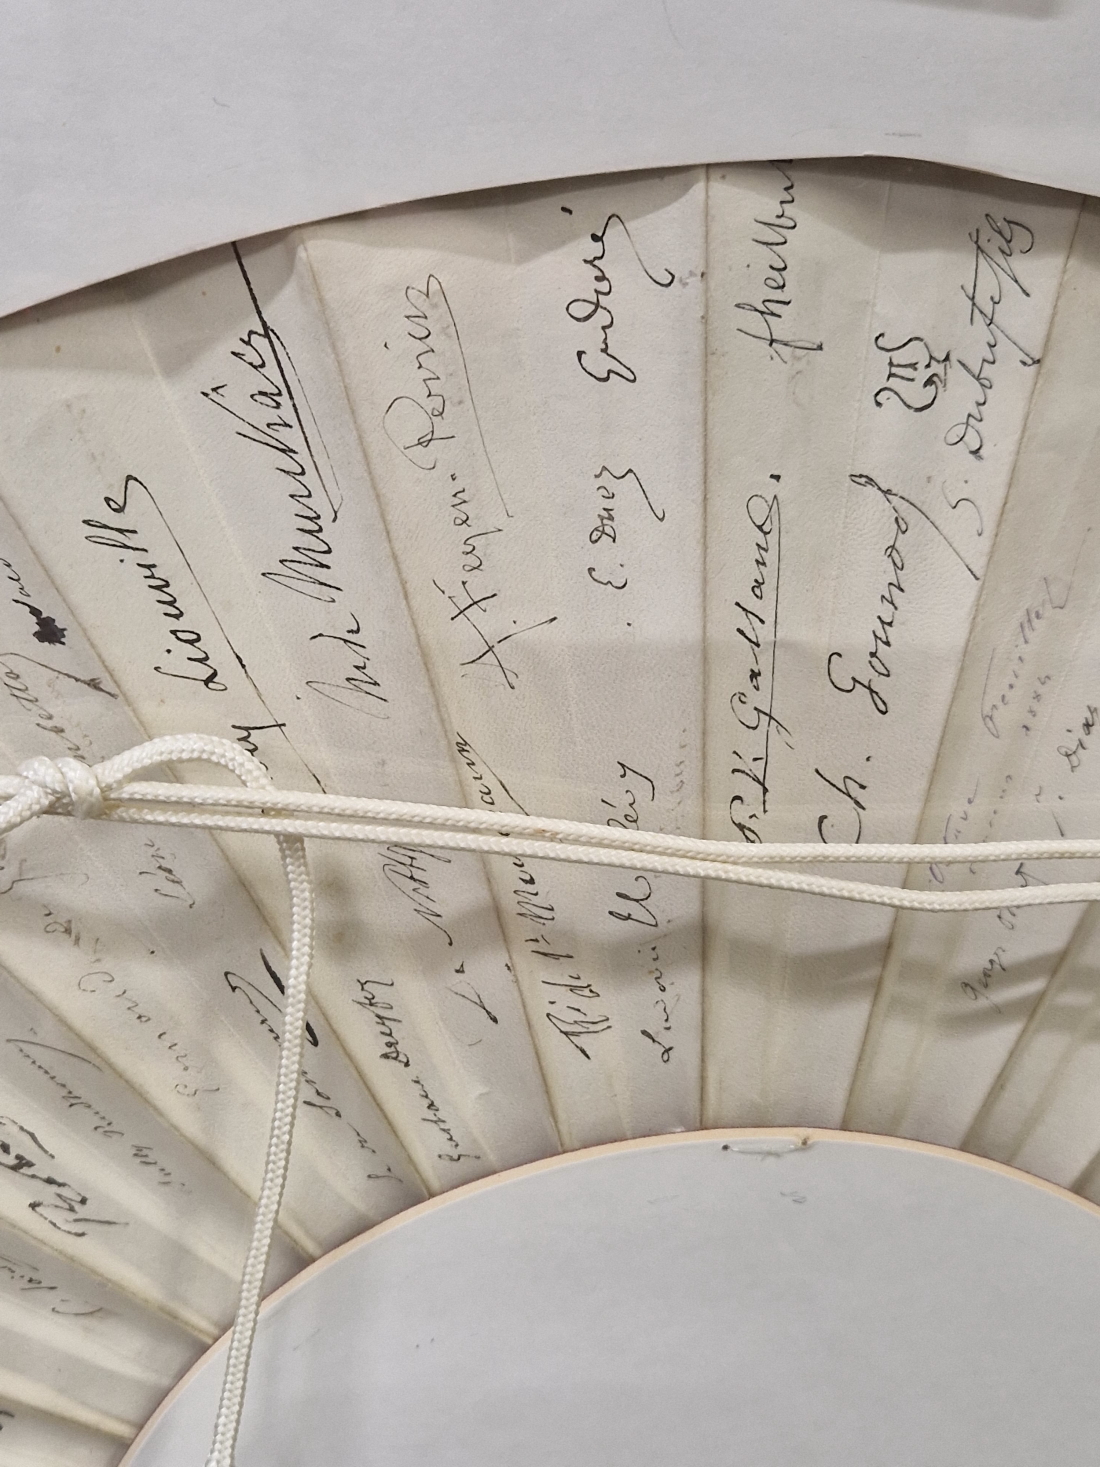 A 1881-3 FAN IN A DOUBLE SIDED FRAME, THE BACK OF THE HOLLY PAINTED LEAF SIGNED BY FRENCH - Image 4 of 7